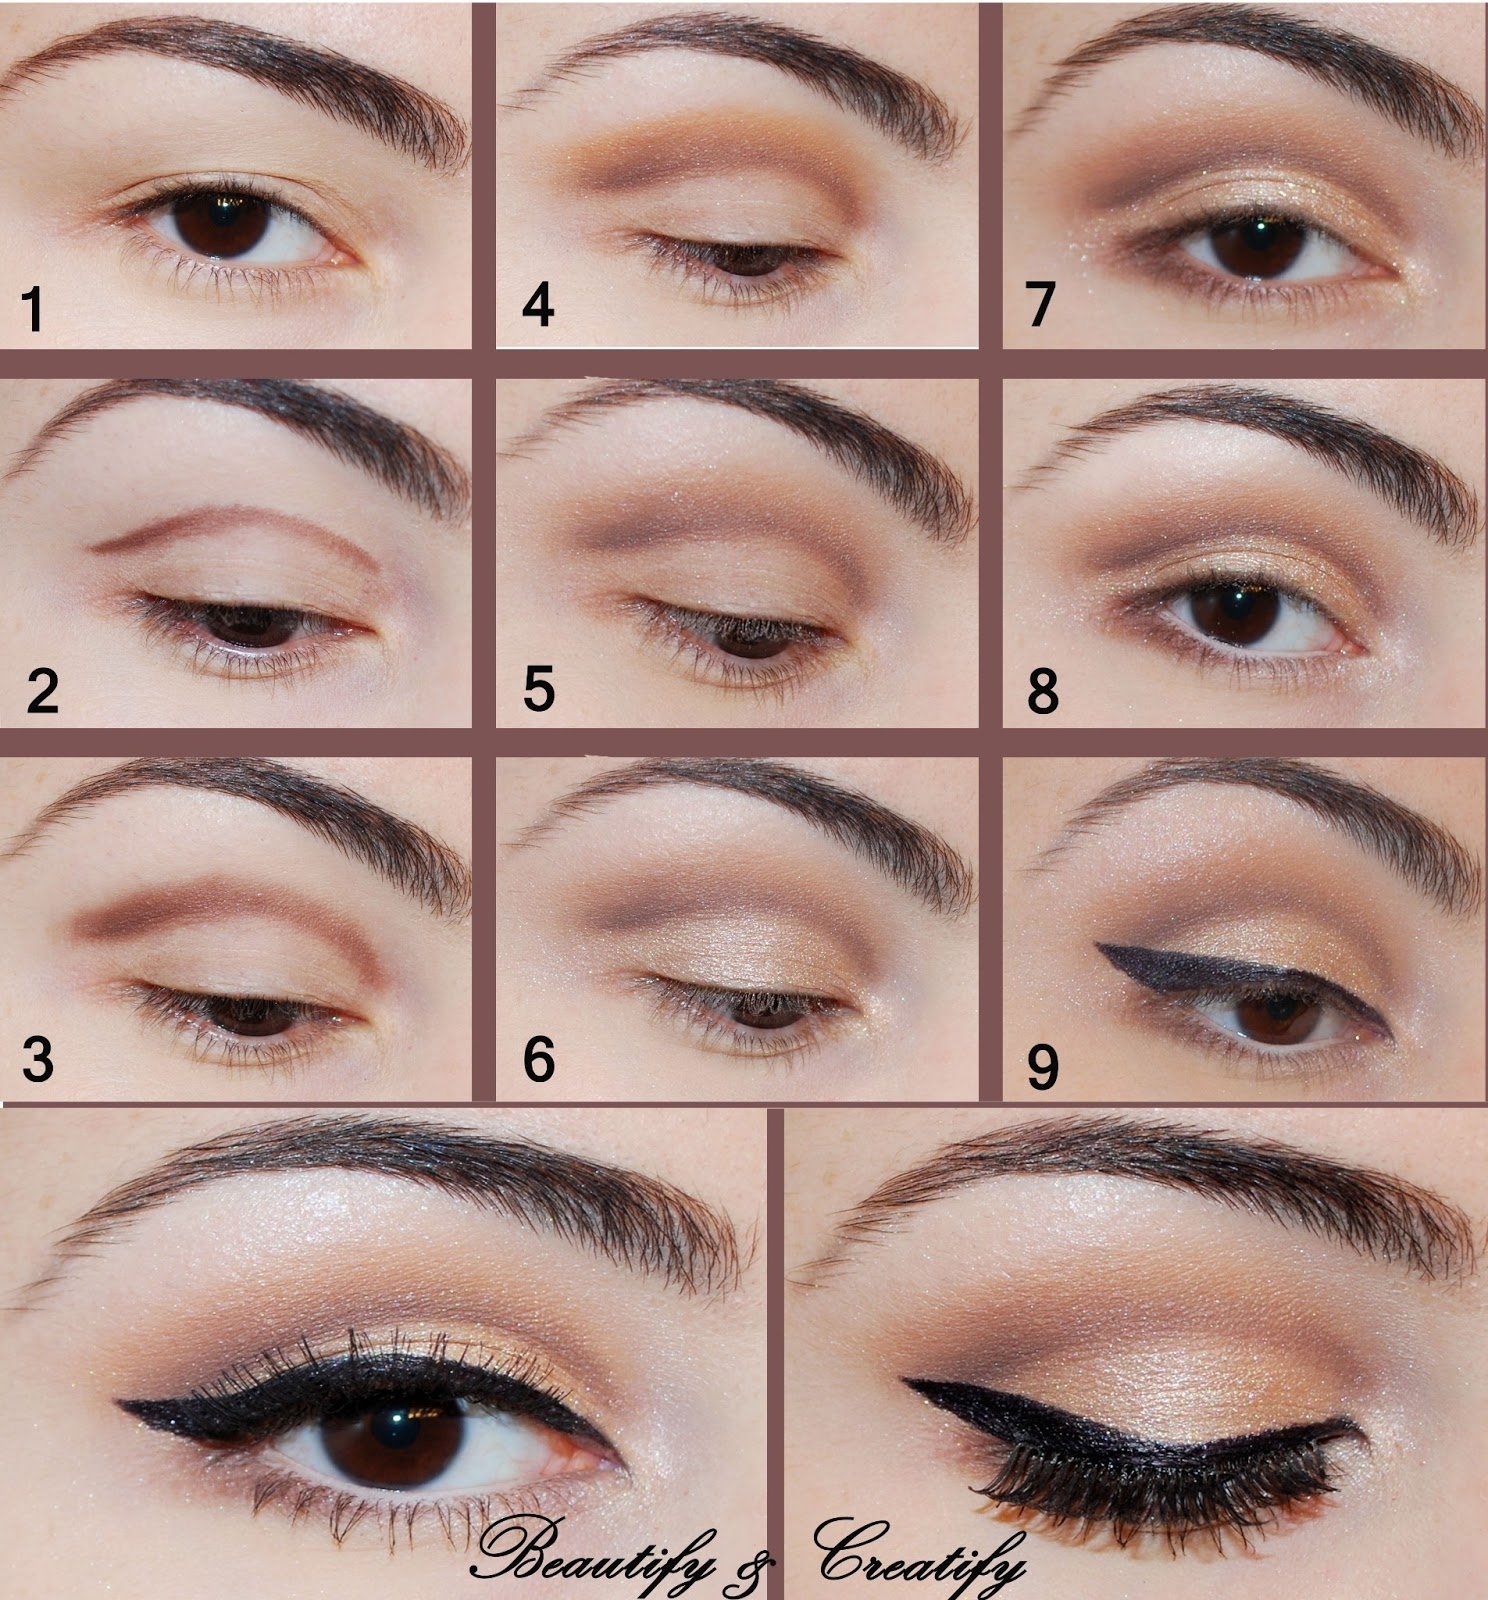 16 Easy Step-By-Step Eyeshadow Tutorials For Beginners inside How To Do Eye Makeup Step By Step With Pictures